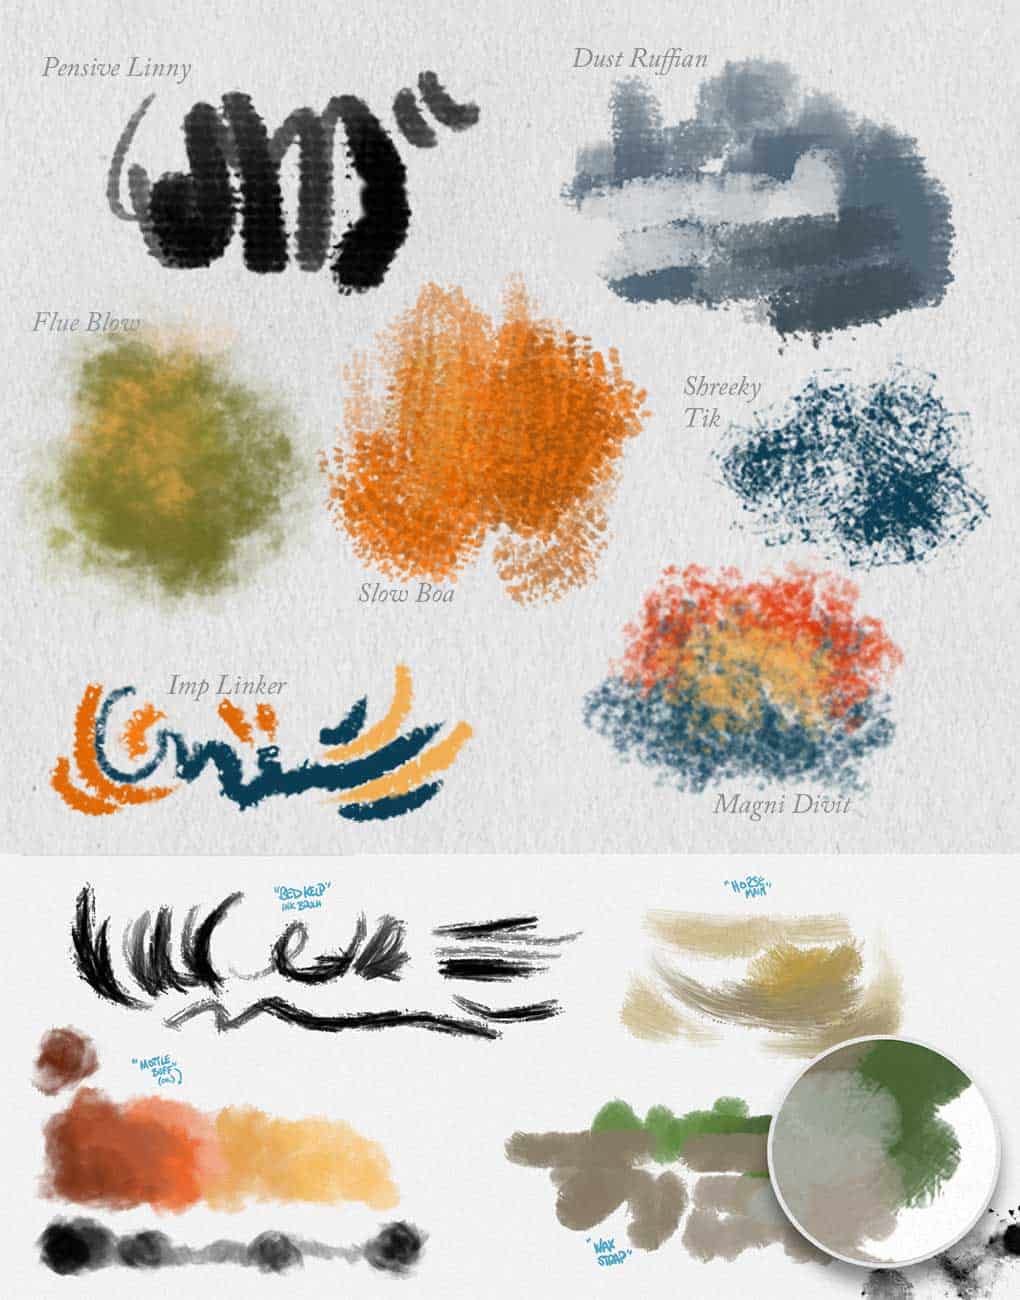 download photoshop brushes for digital painting